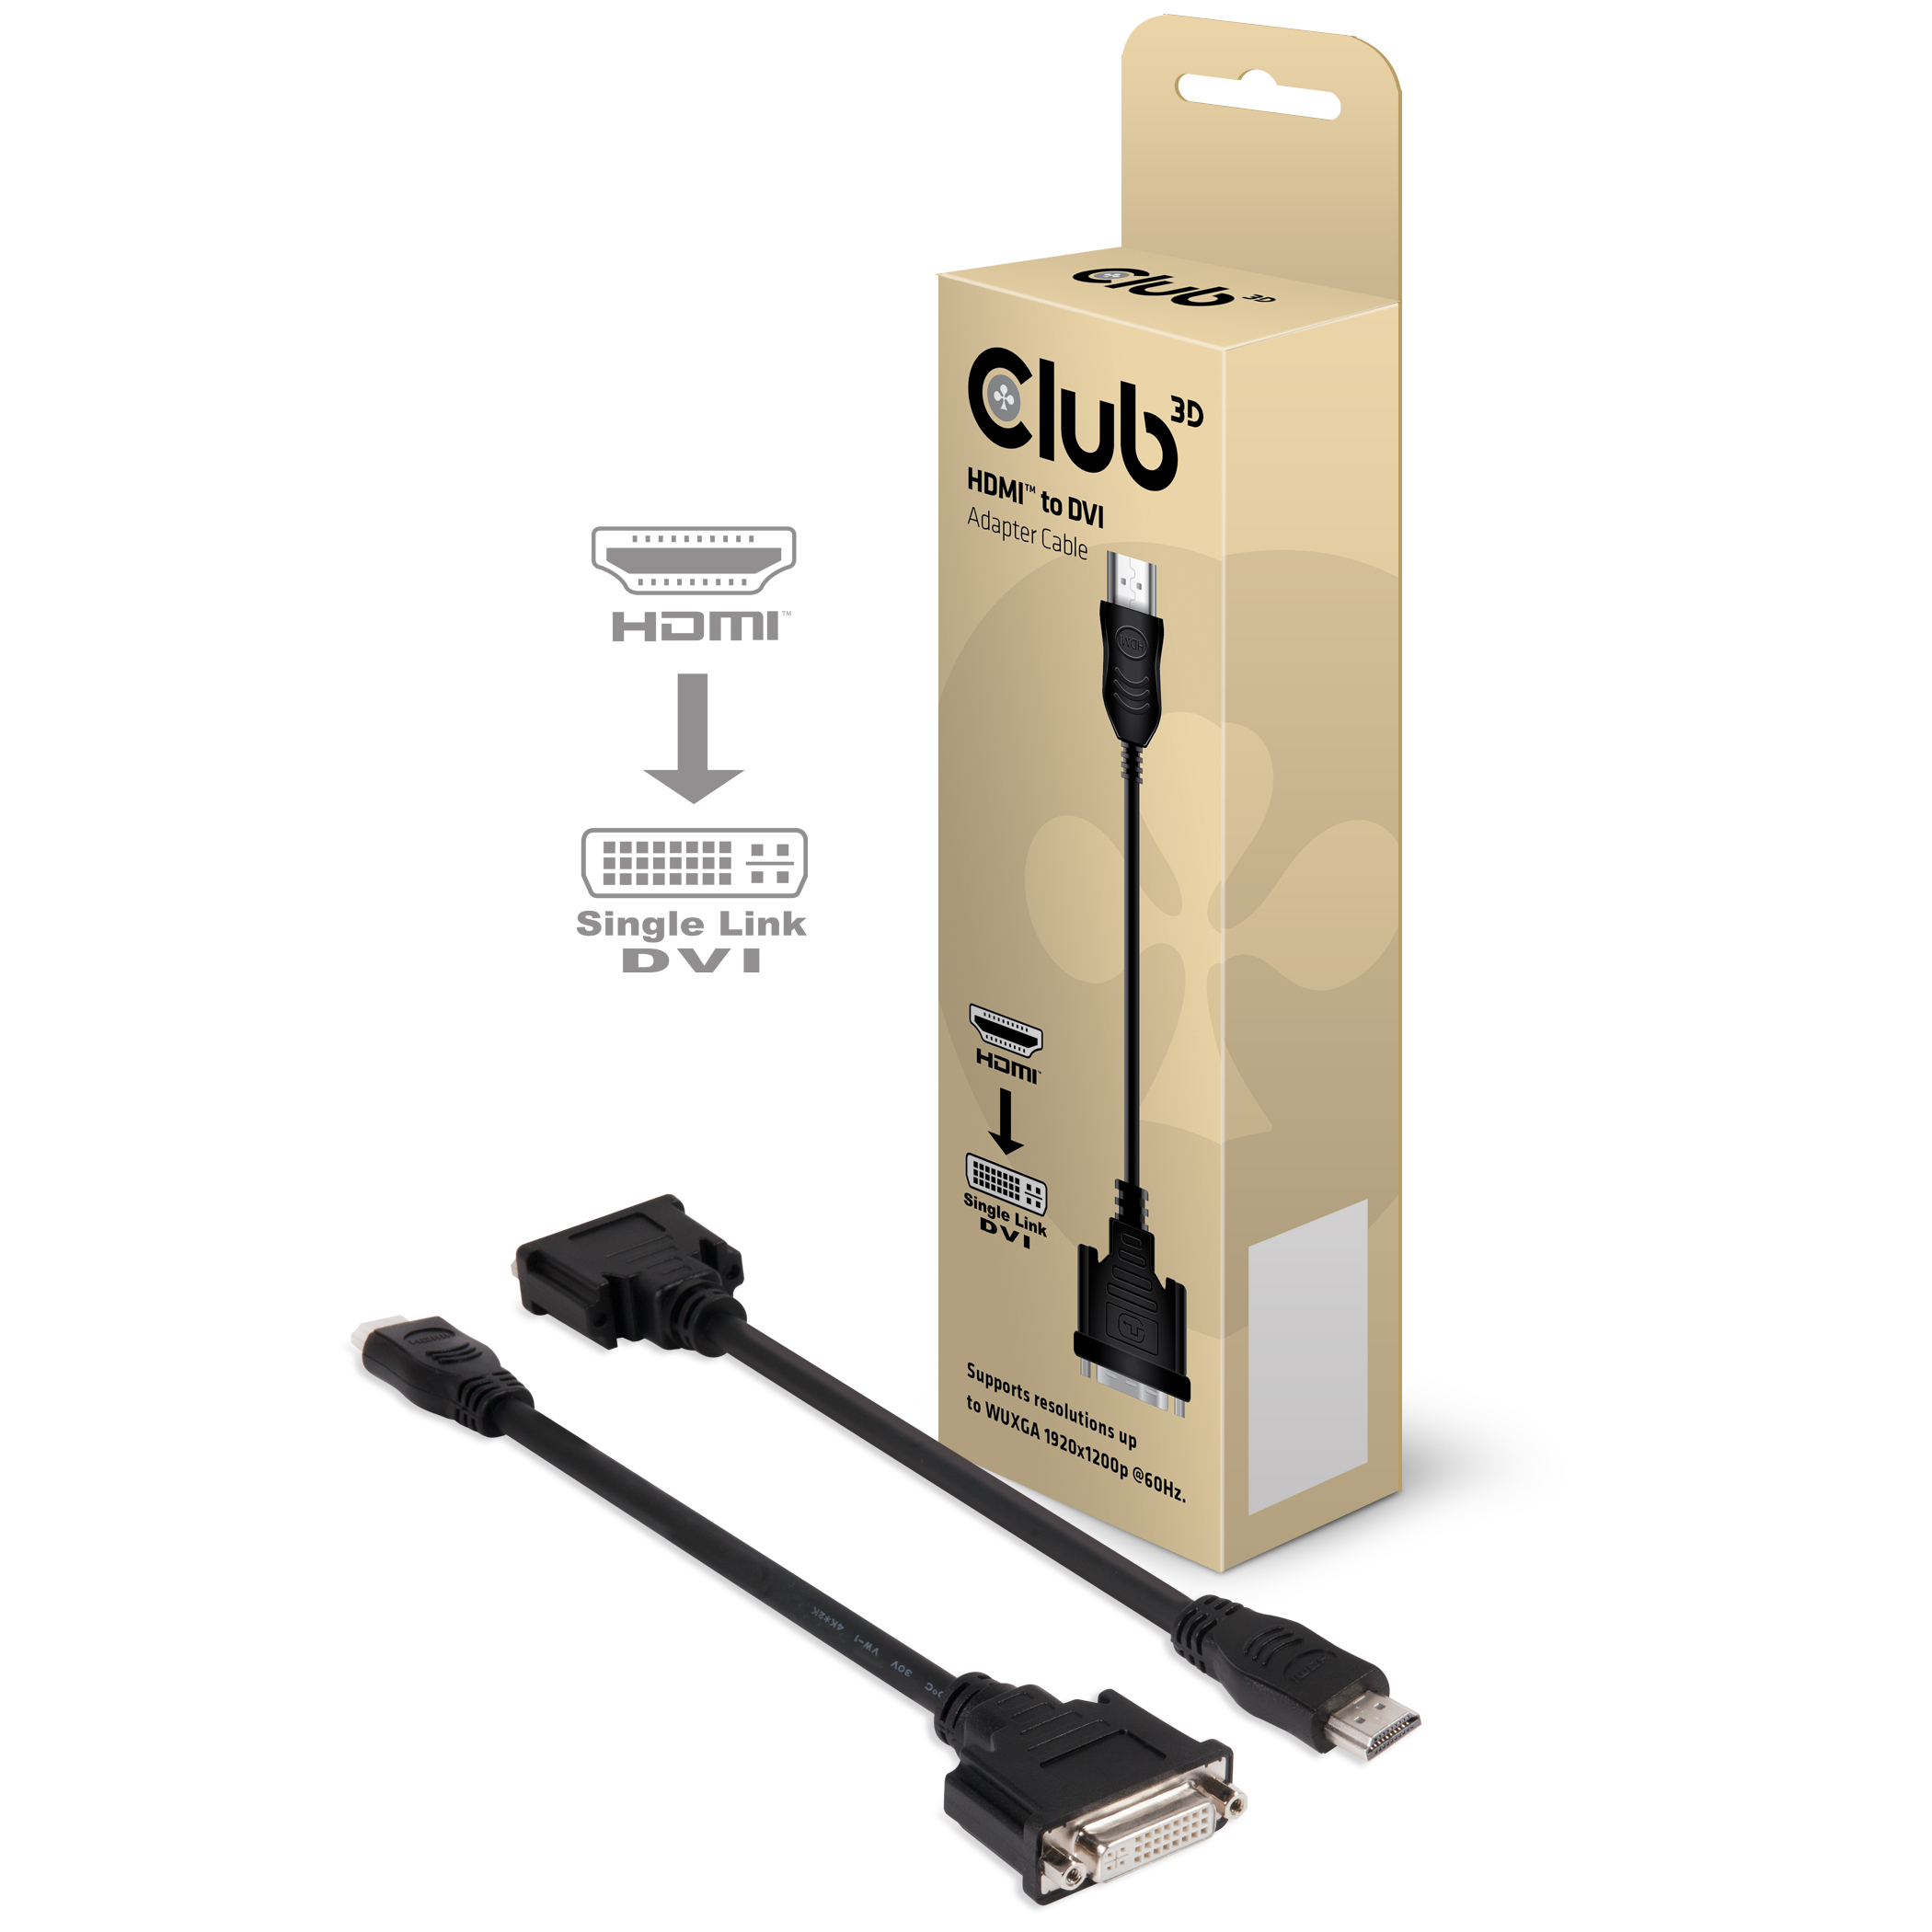 Club 3D HDMI to DVI Single Link Passive Adapter